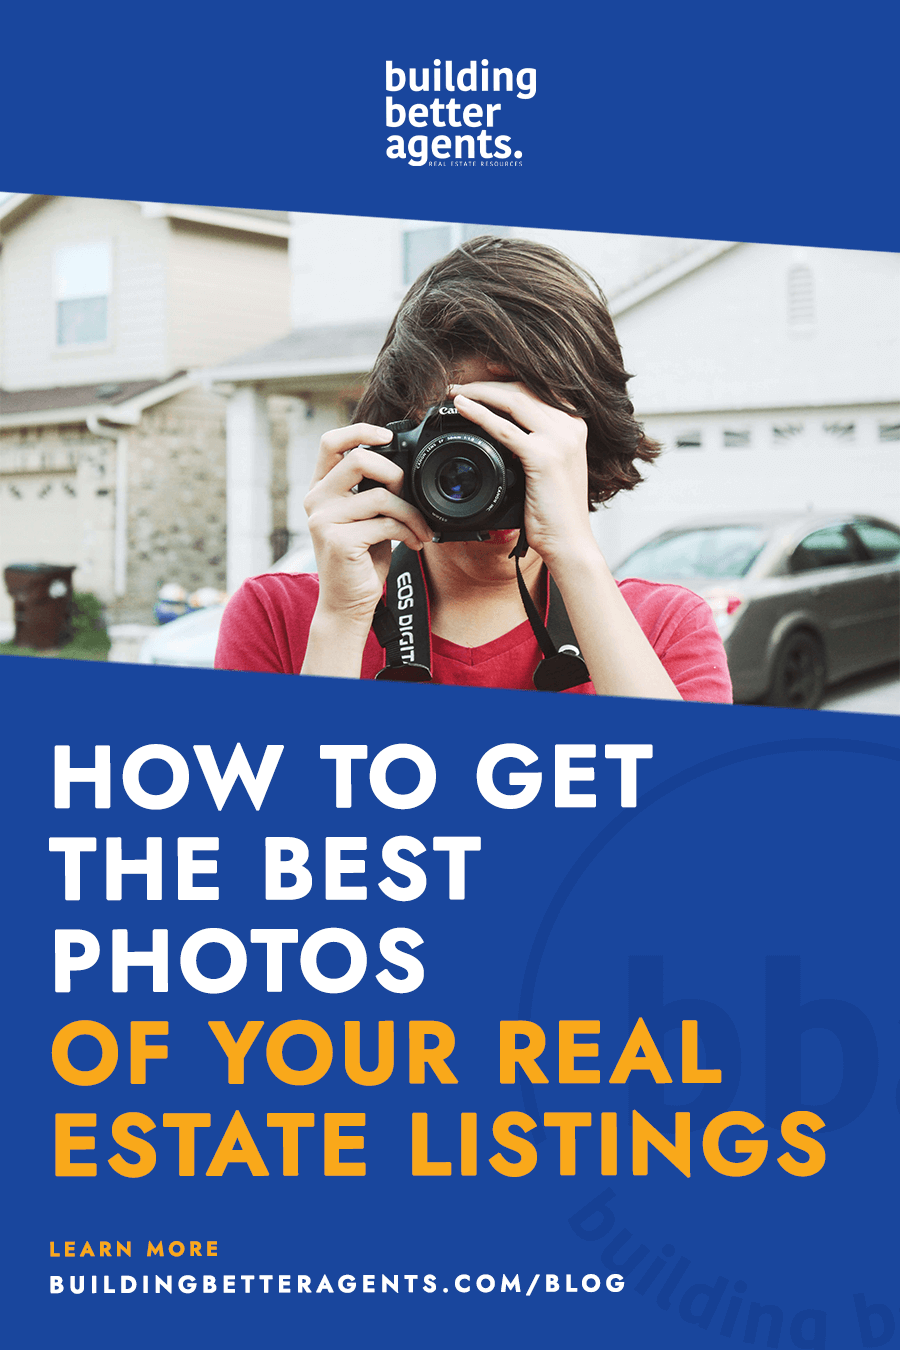 How to Get the Best Photos of Your Listings